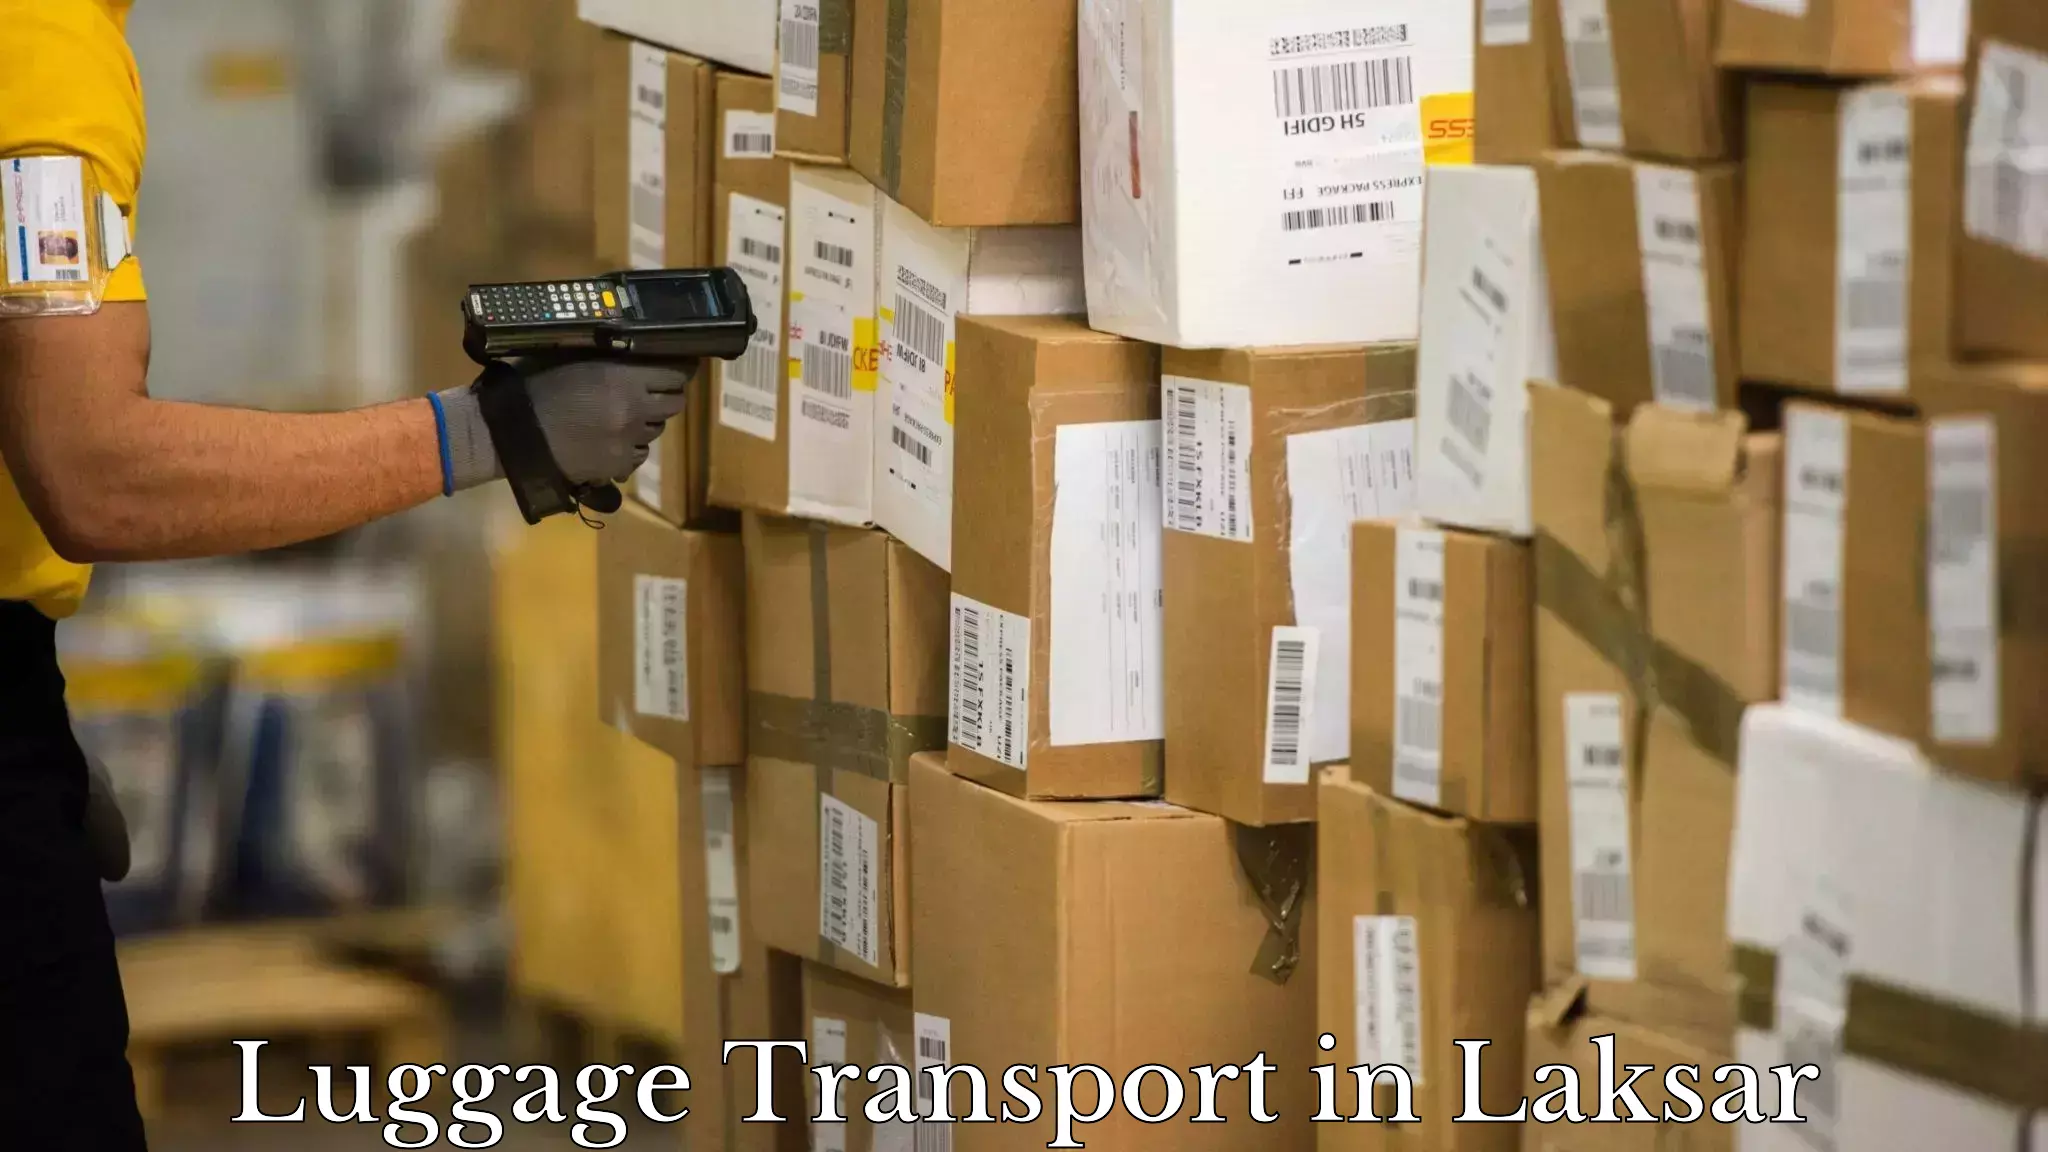 Baggage shipping schedule in Laksar